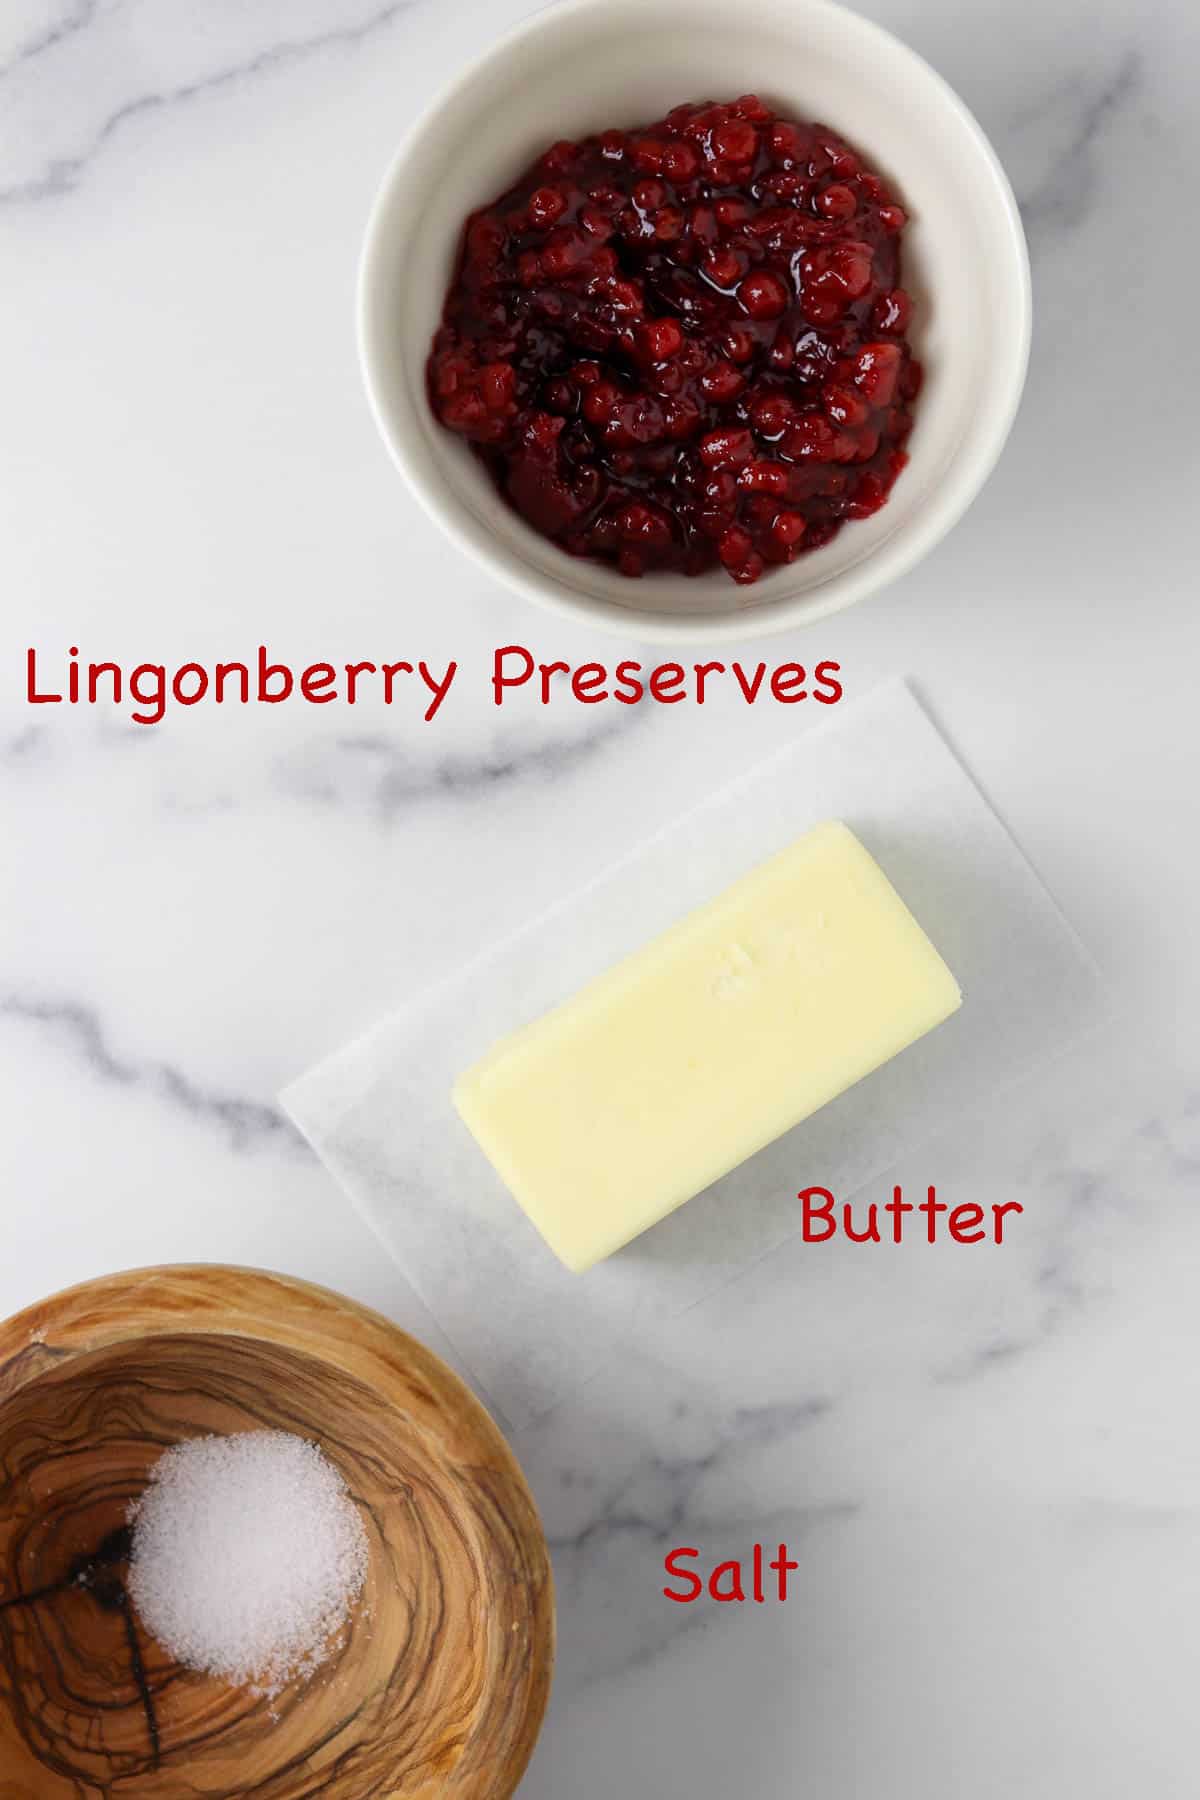 Labeled ingredients for lingonberry butter.